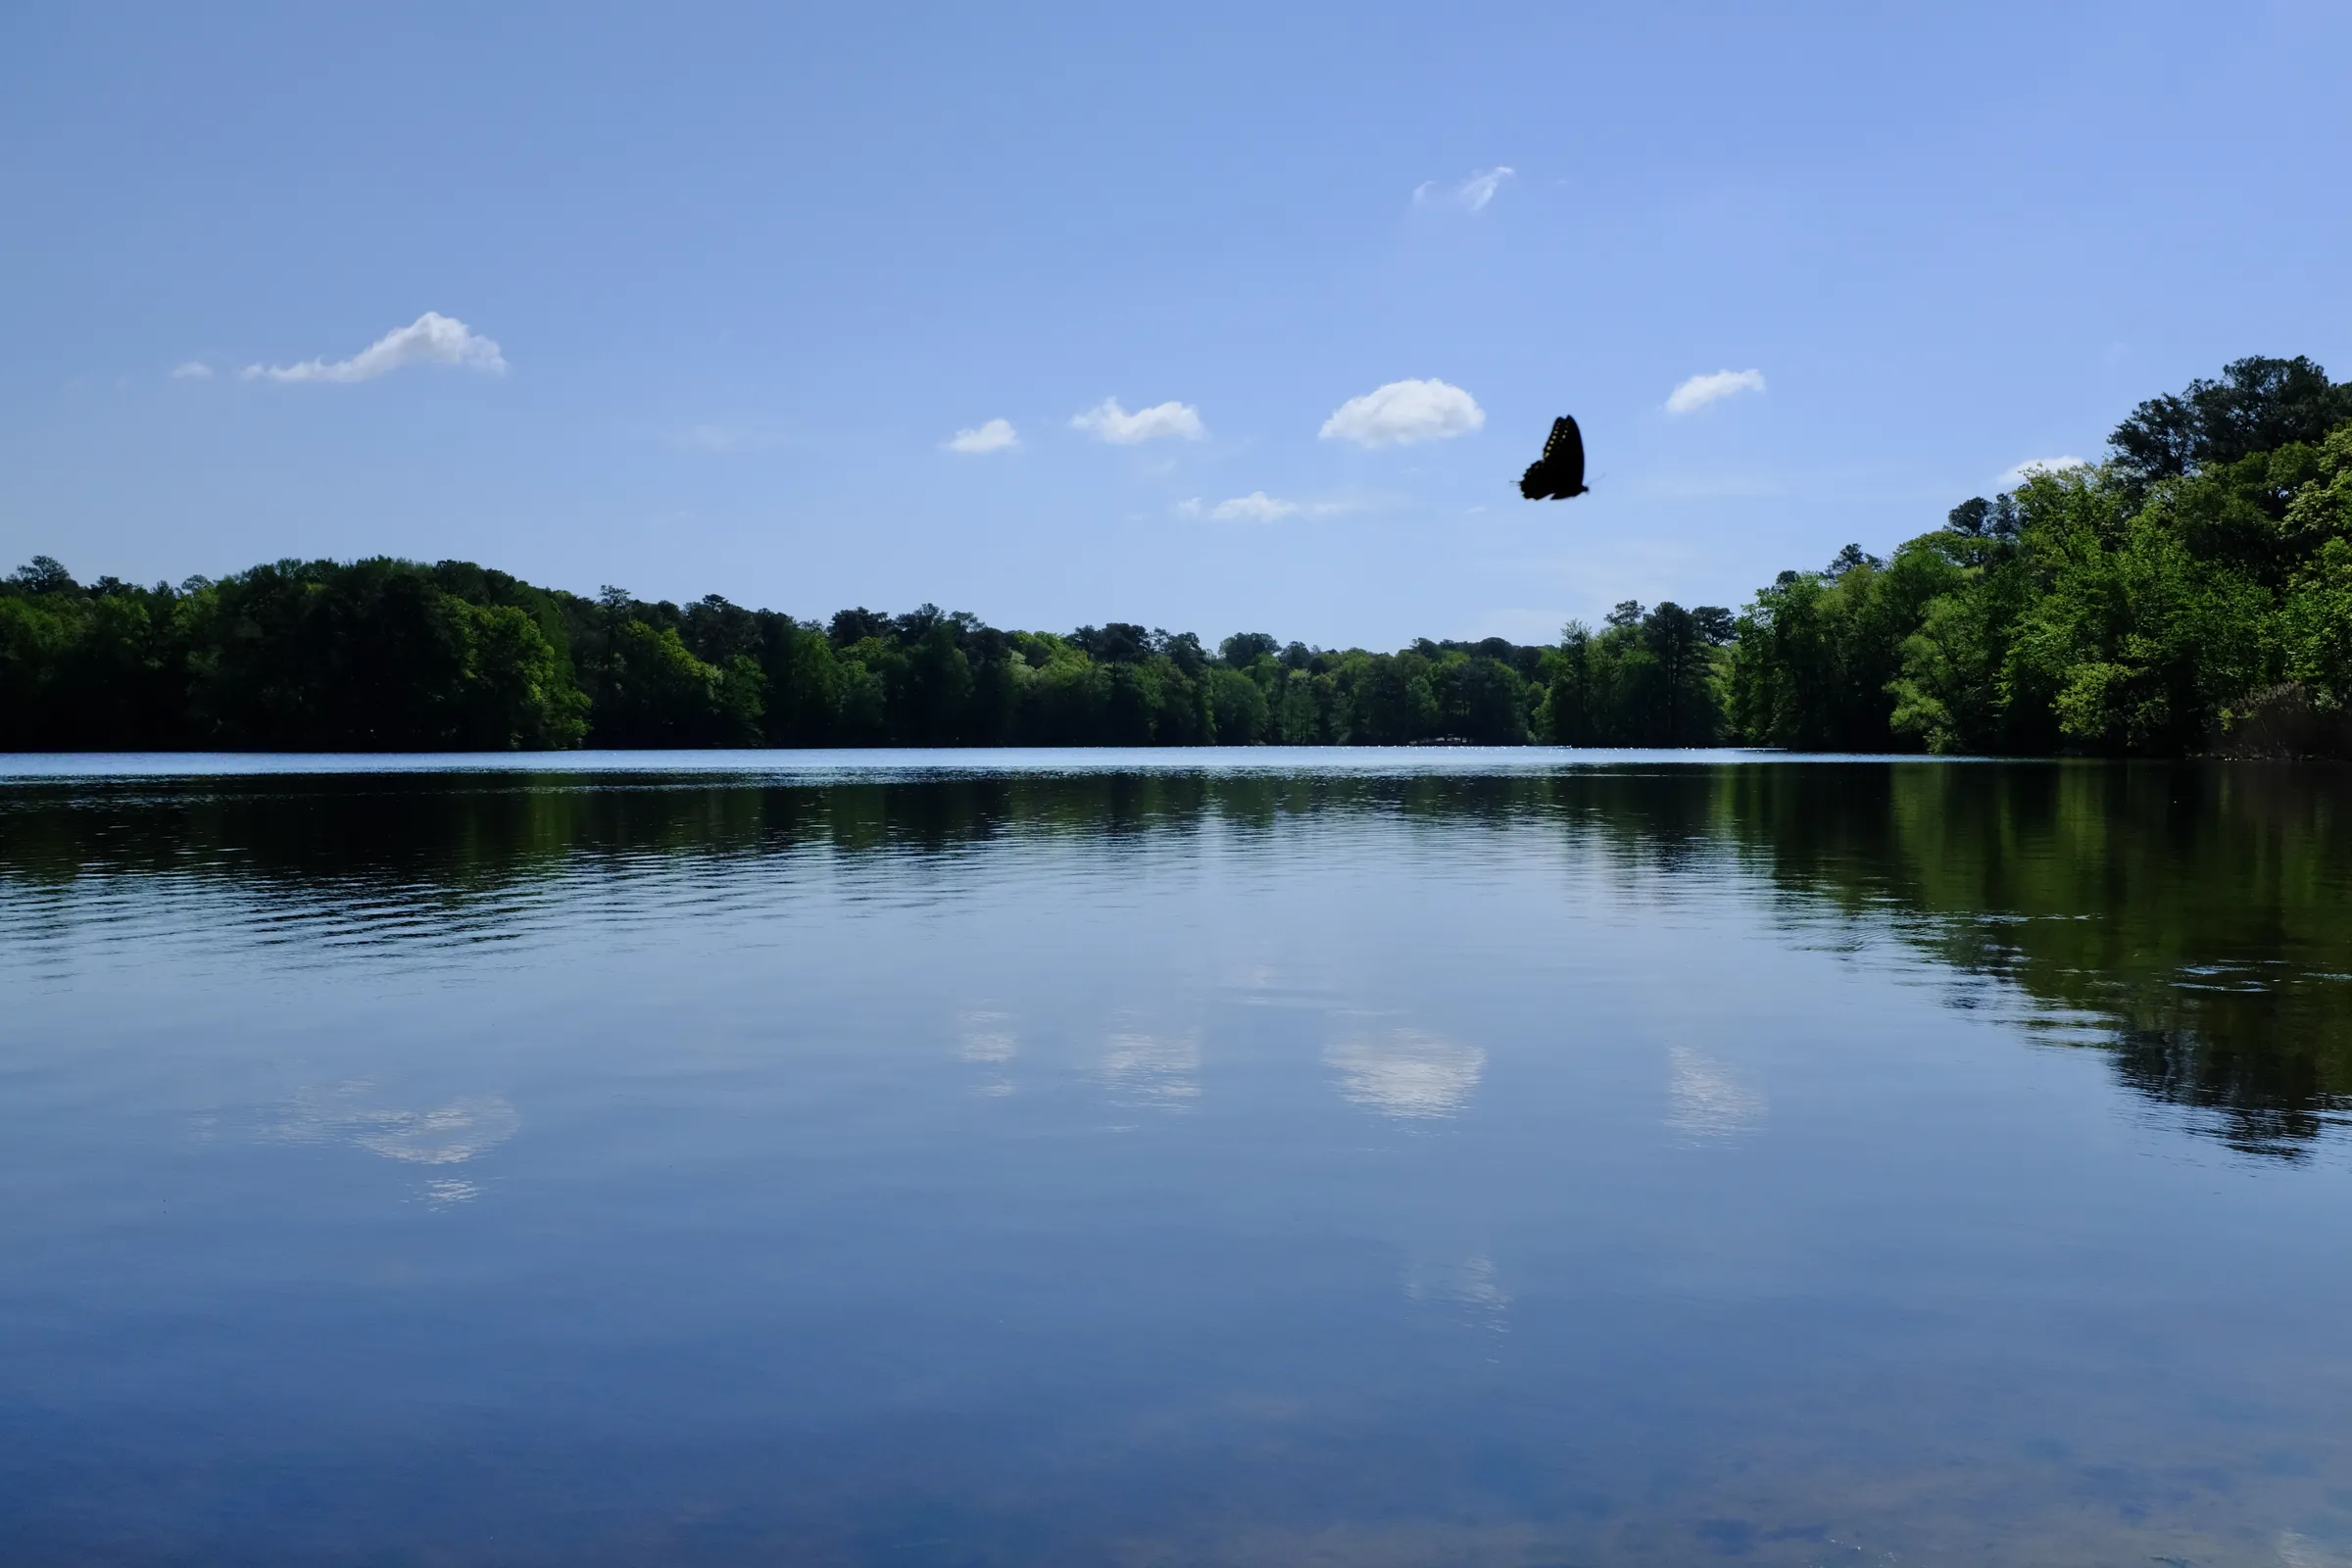 A blue sky and a bright green tree line reflecting on the still water below, a butterfly glides across the foreground. Taken at Trap Pond State Park in Delaware.